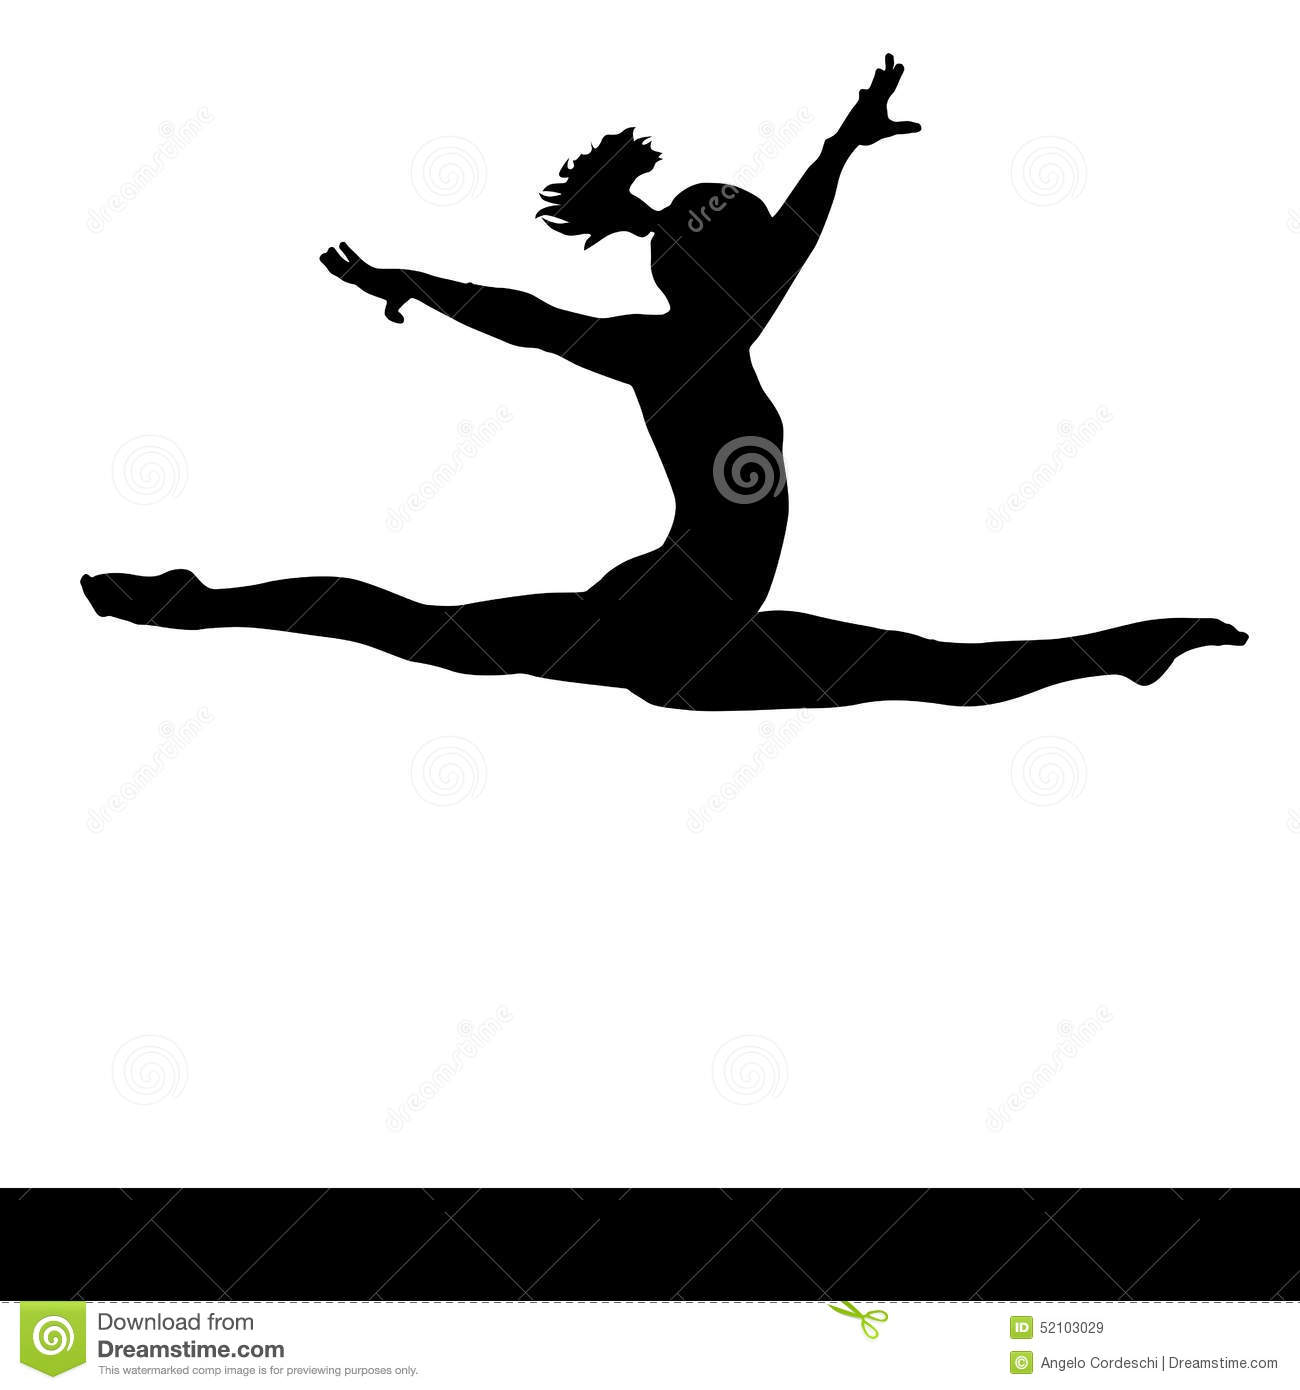 Gymnast Silhouette Decal Remo